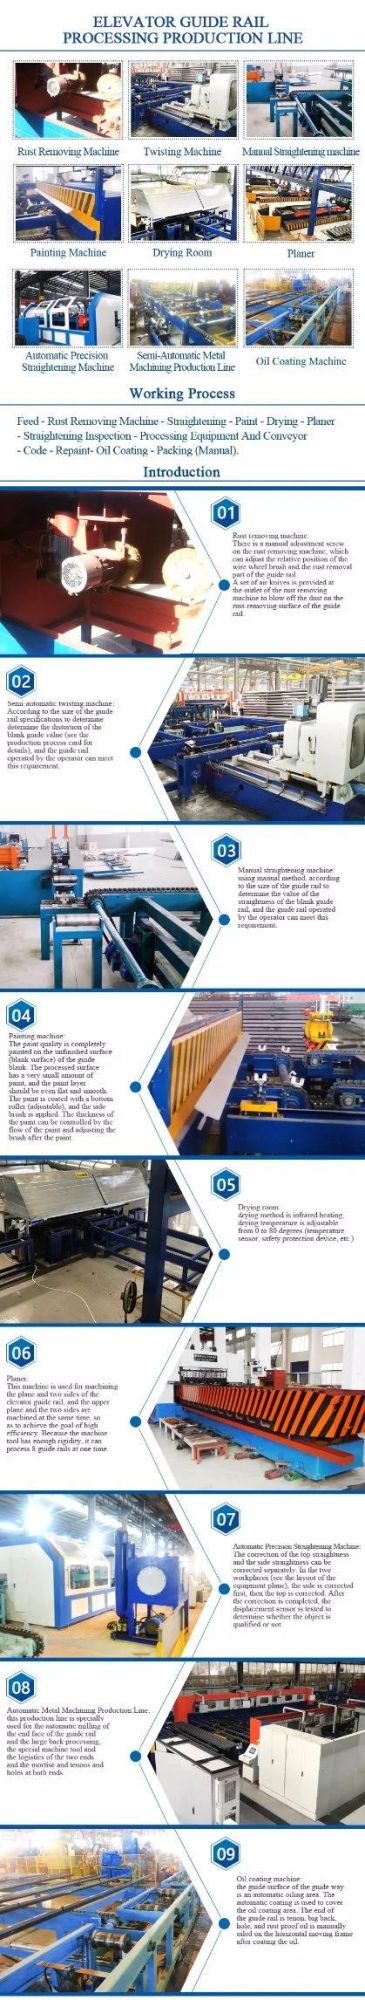 Making Galvanized Steel Profile Cold Drawn/Drawing Roll/Rolling/Roller Making/Forming Machinery Elevator Guide Rail Machine